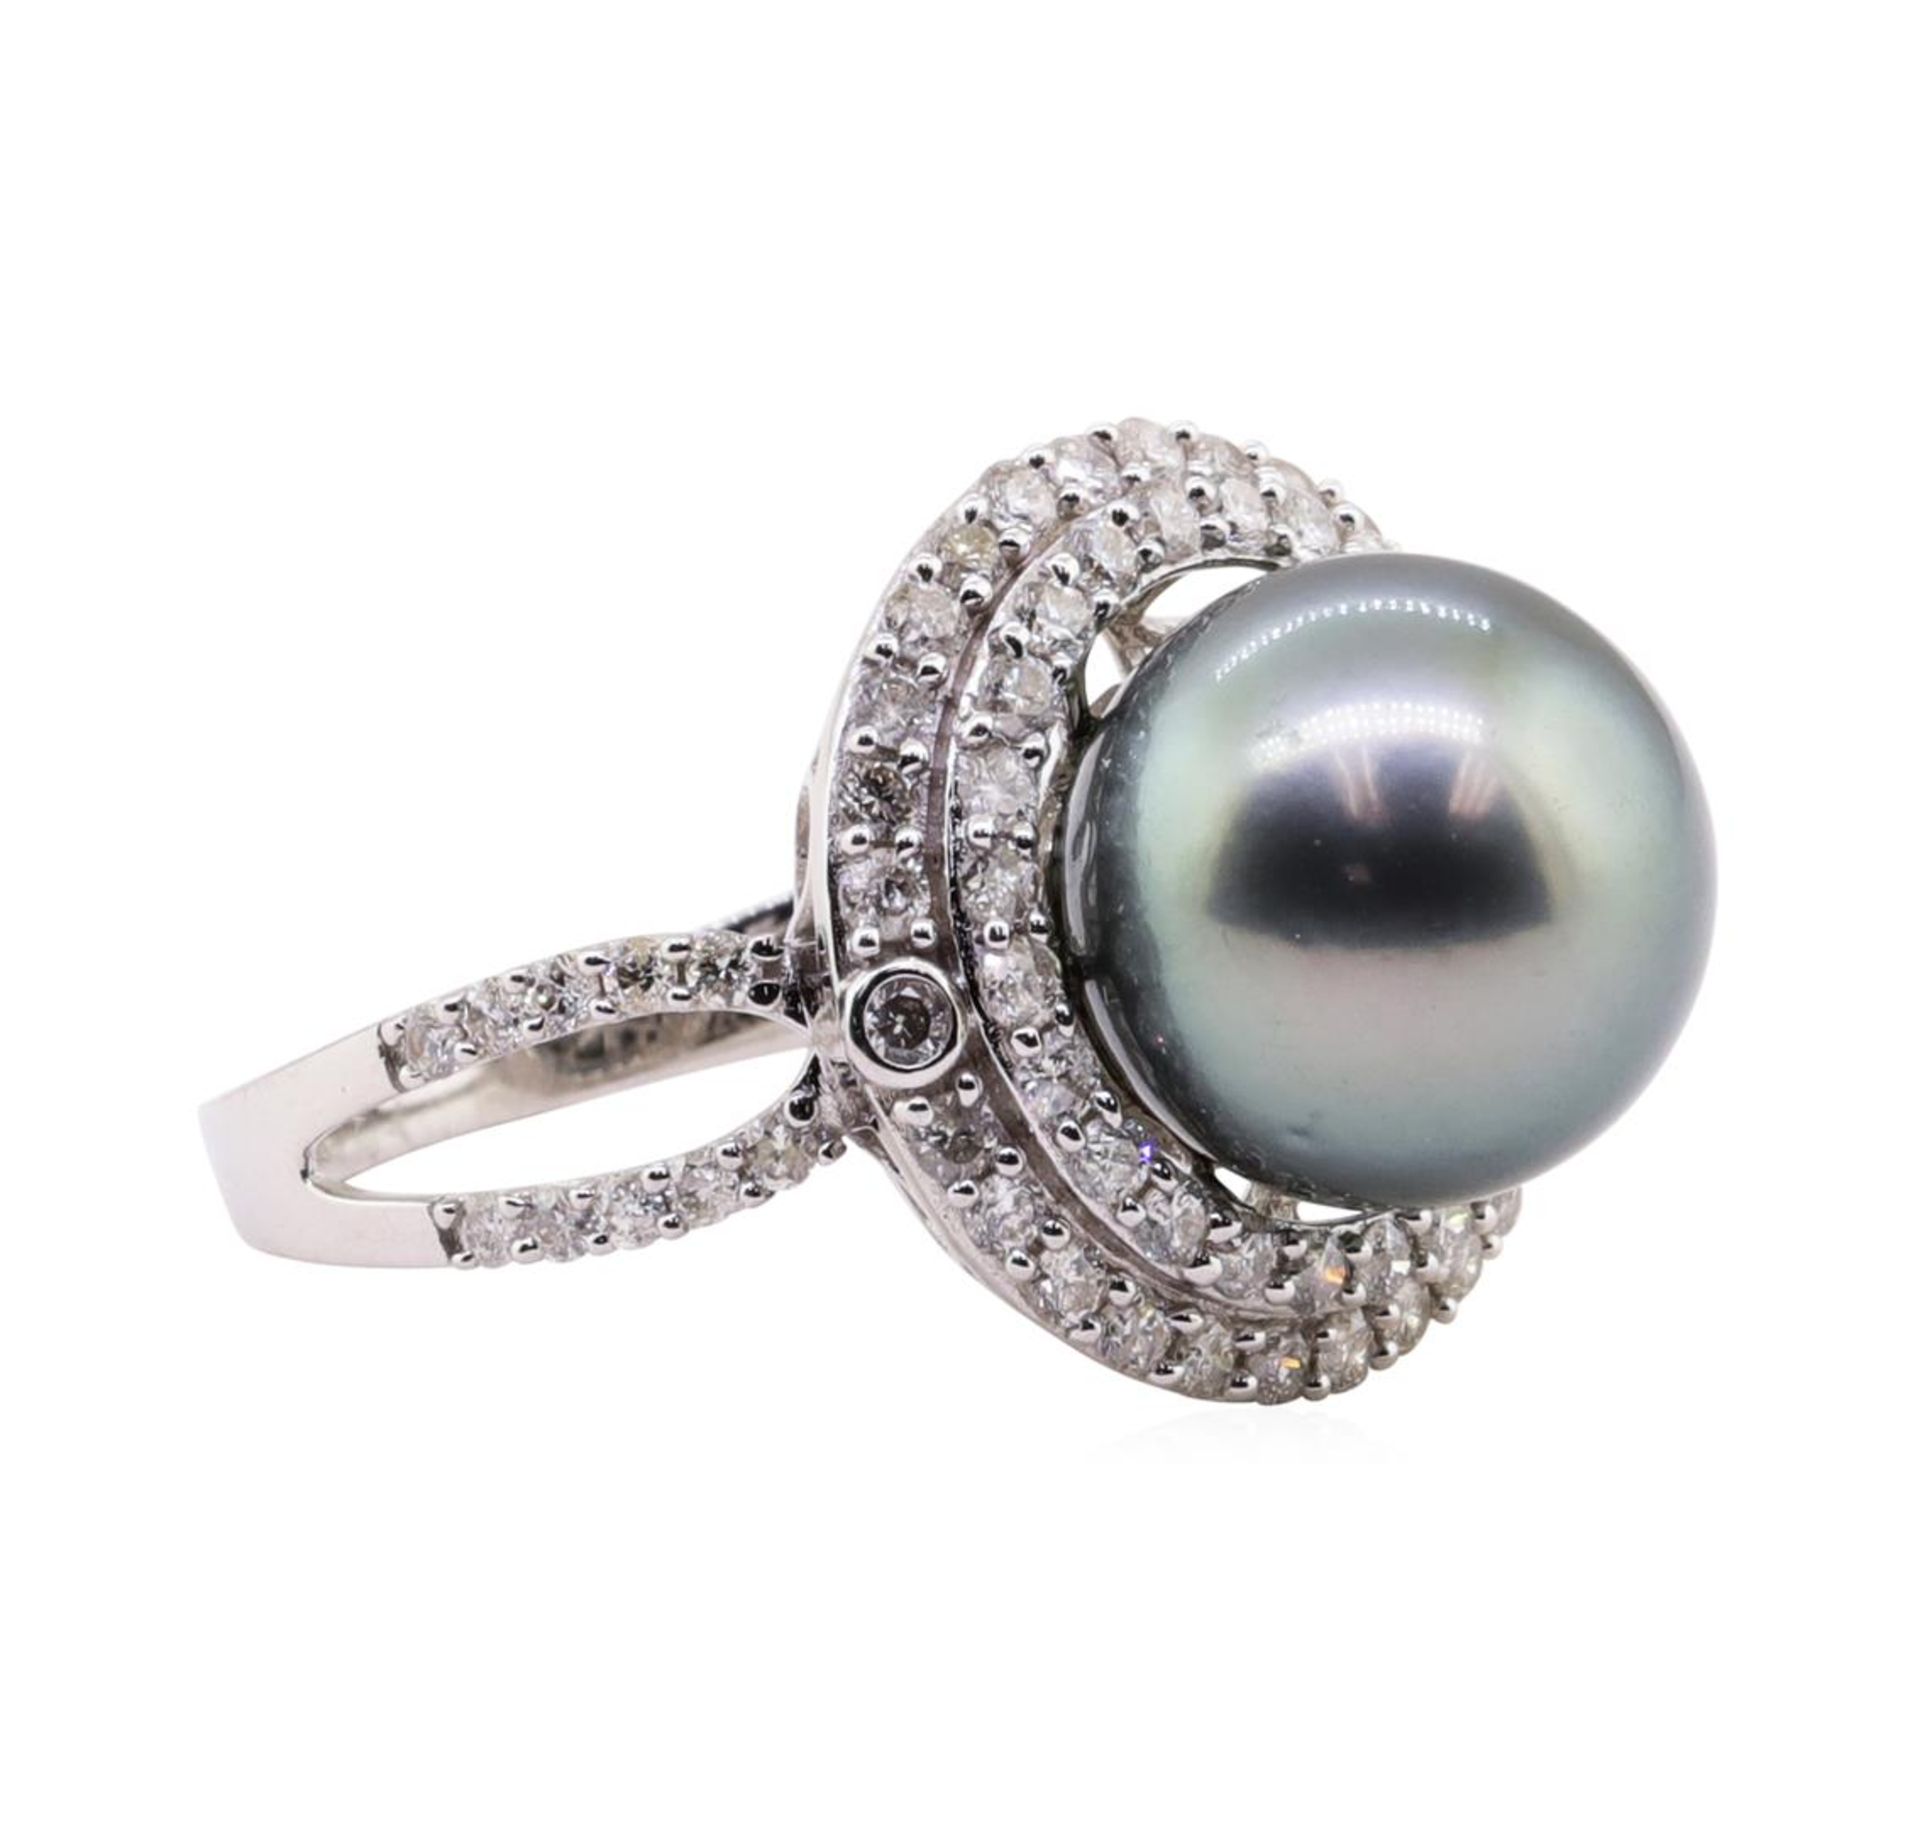 Tahitian Pearl and Diamond Ring - 18KT White Gold - Image 2 of 5